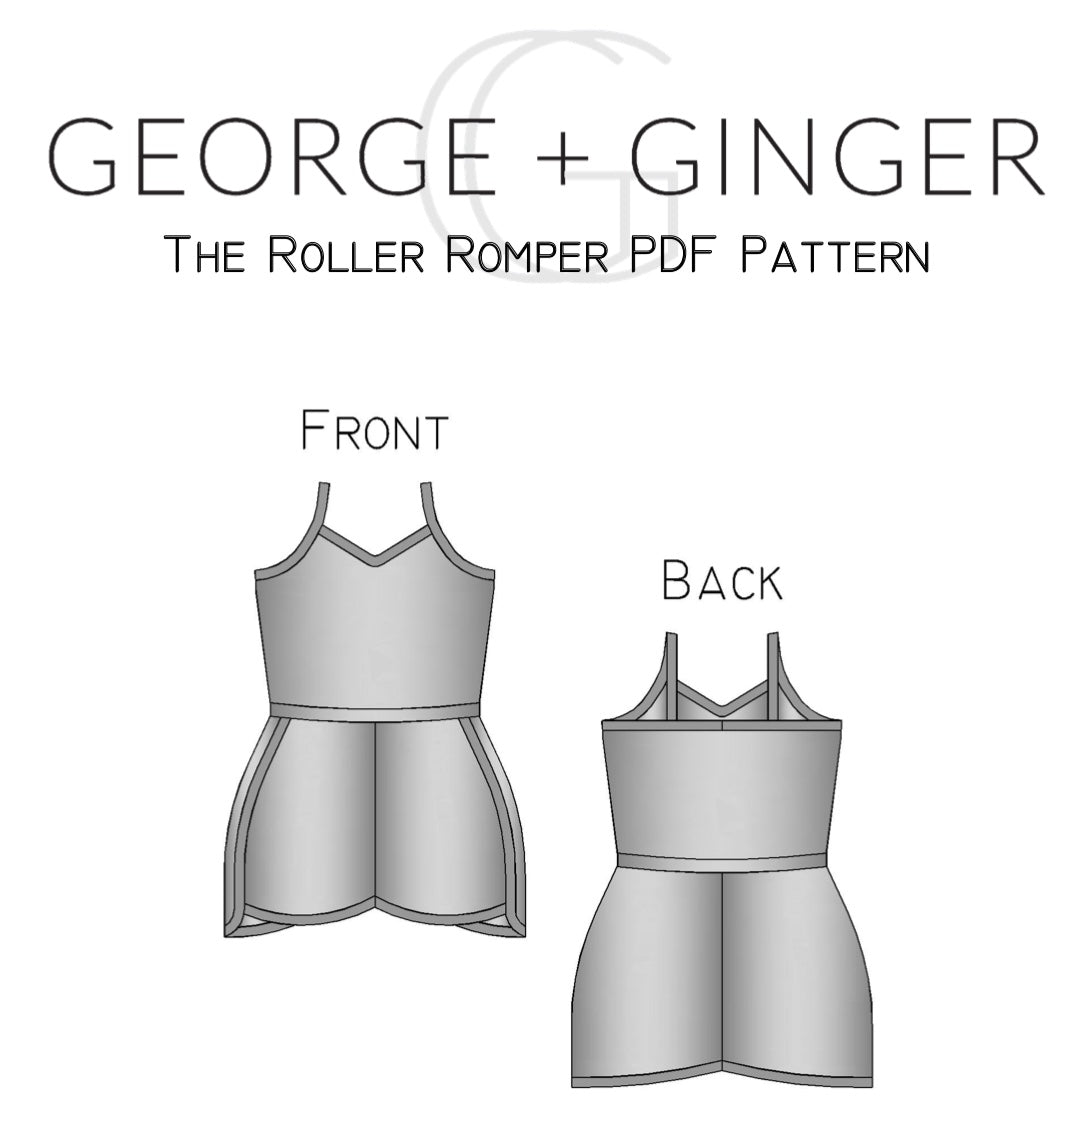 The Roller Romper PDF Sewing Pattern